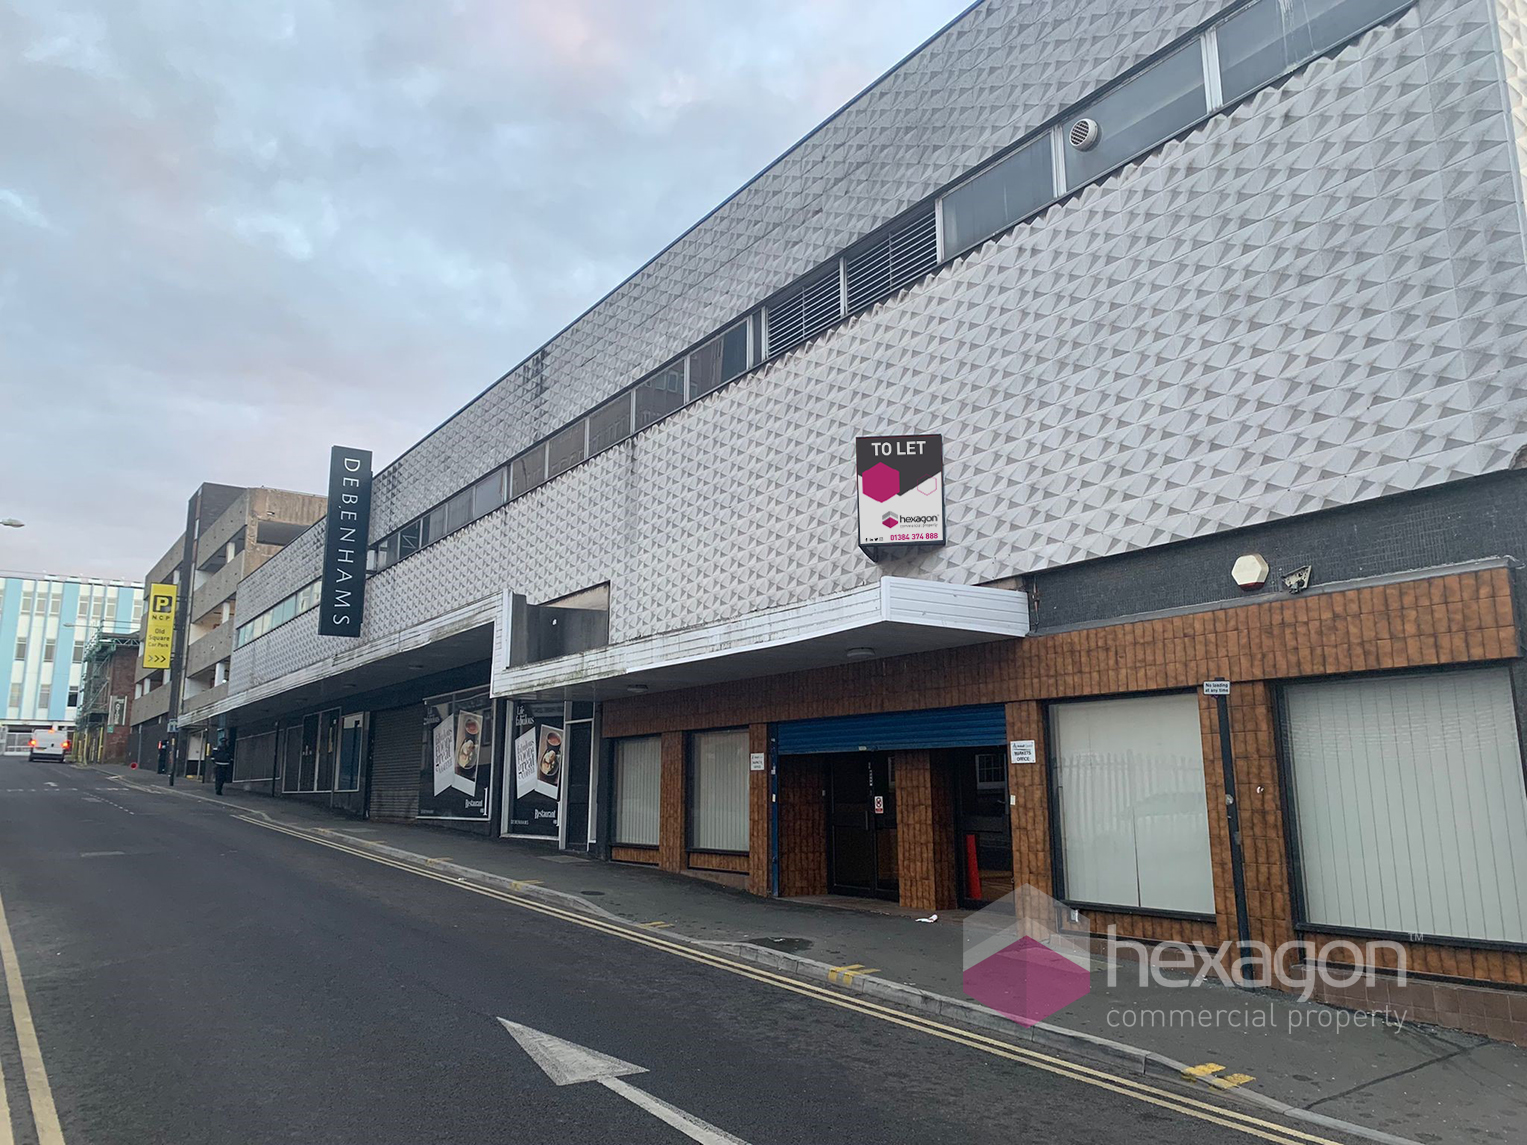 0 bed Retail Property (High Street) for rent in Walsall. From Hexagon Commercial Property